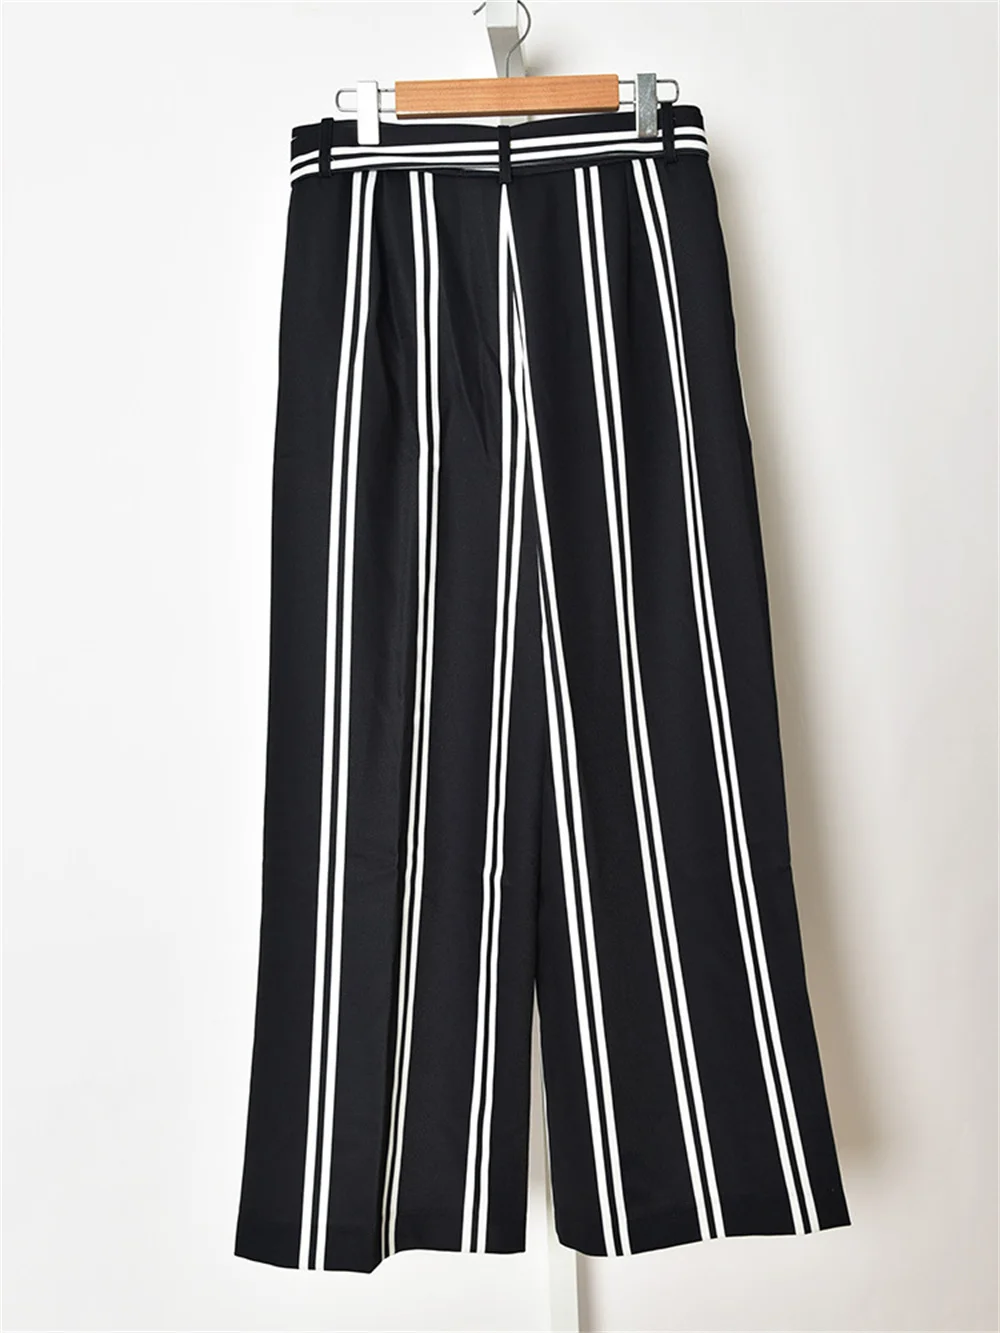 Clearance Specials Ultra-Low Price Women Lace Up Waist Straight  Contrast Color Striped Wide Leg Pants